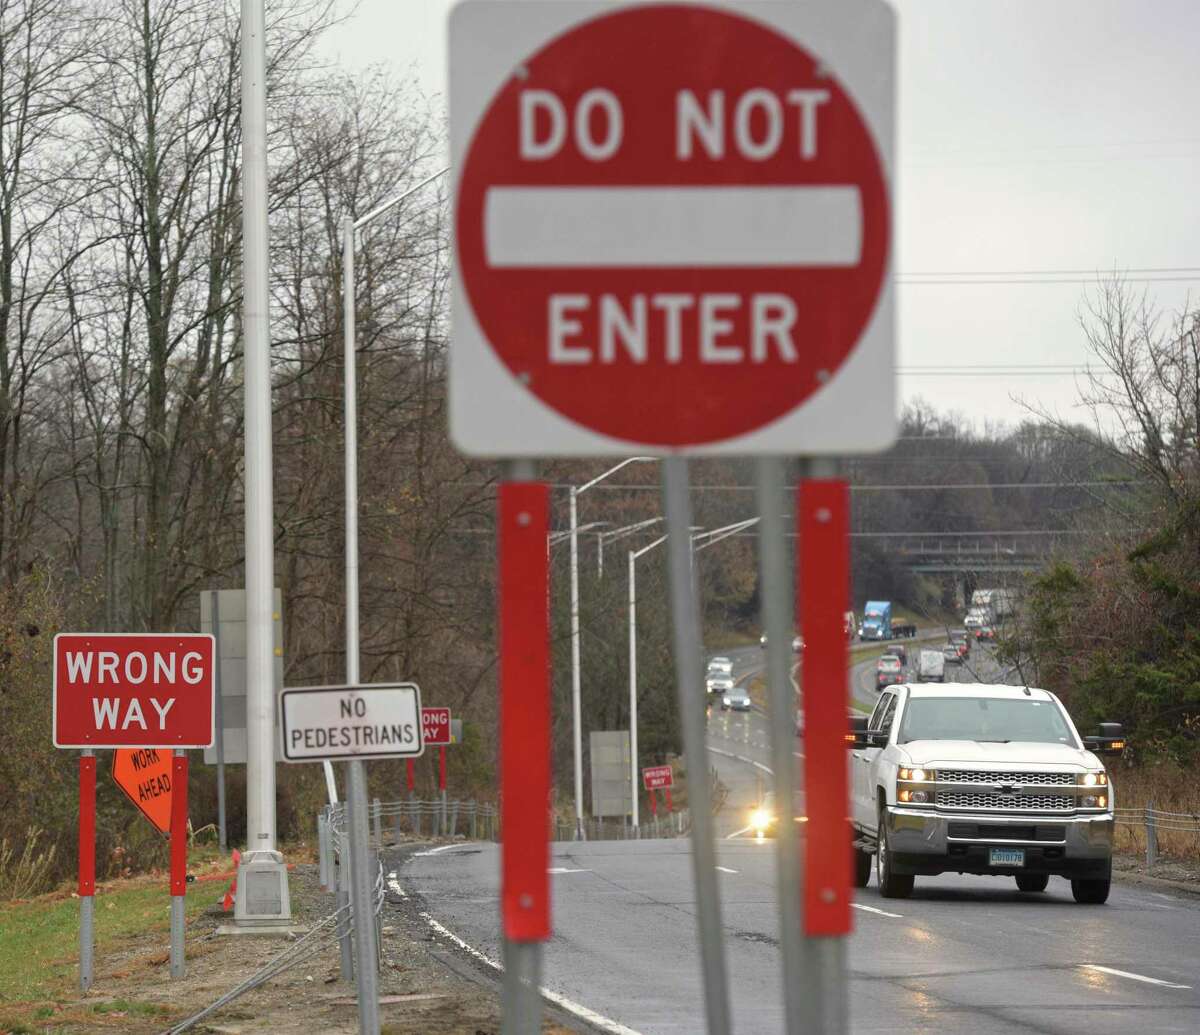 The state is installing high-tech wrong-way signs to prevent crashes at the Westbound Exit 8 off ramp. Monday, November 18, 2019, Danbury, Conn.